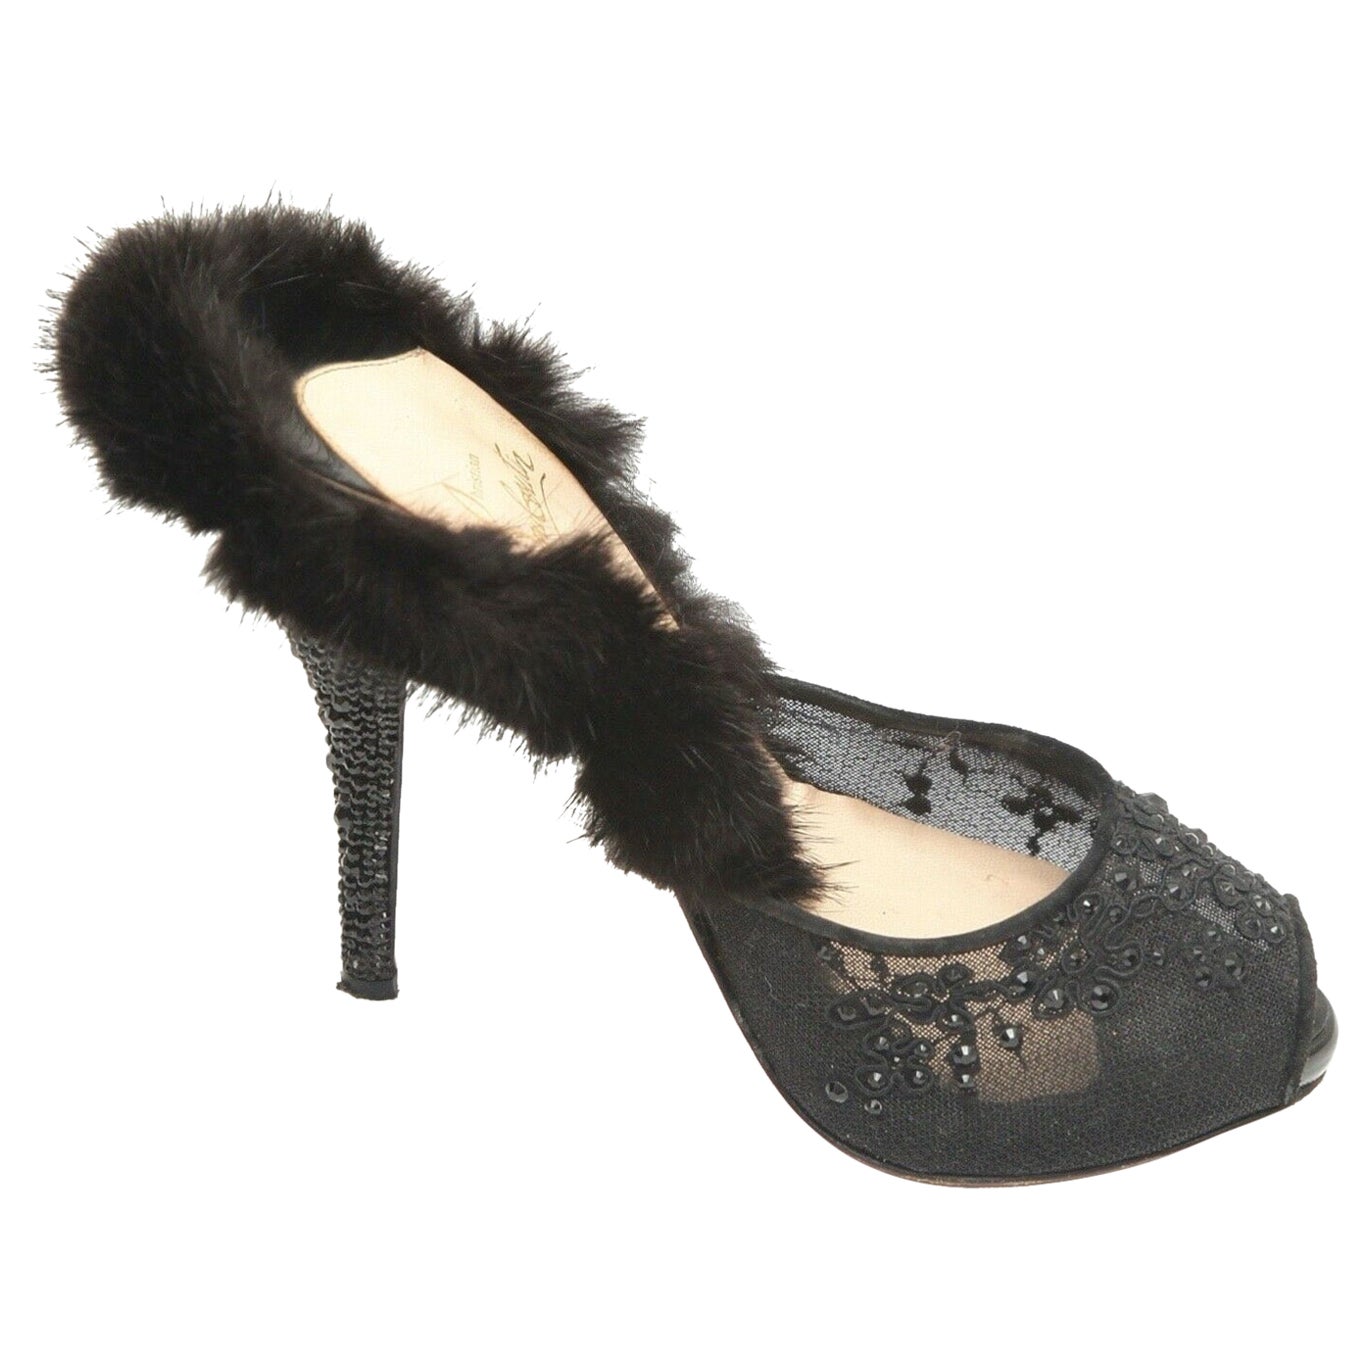 CHRISTIAN LOUBOUTIN Black Mule NUTRIA 120 Fur Crystals Lace Netting Leather 38.5